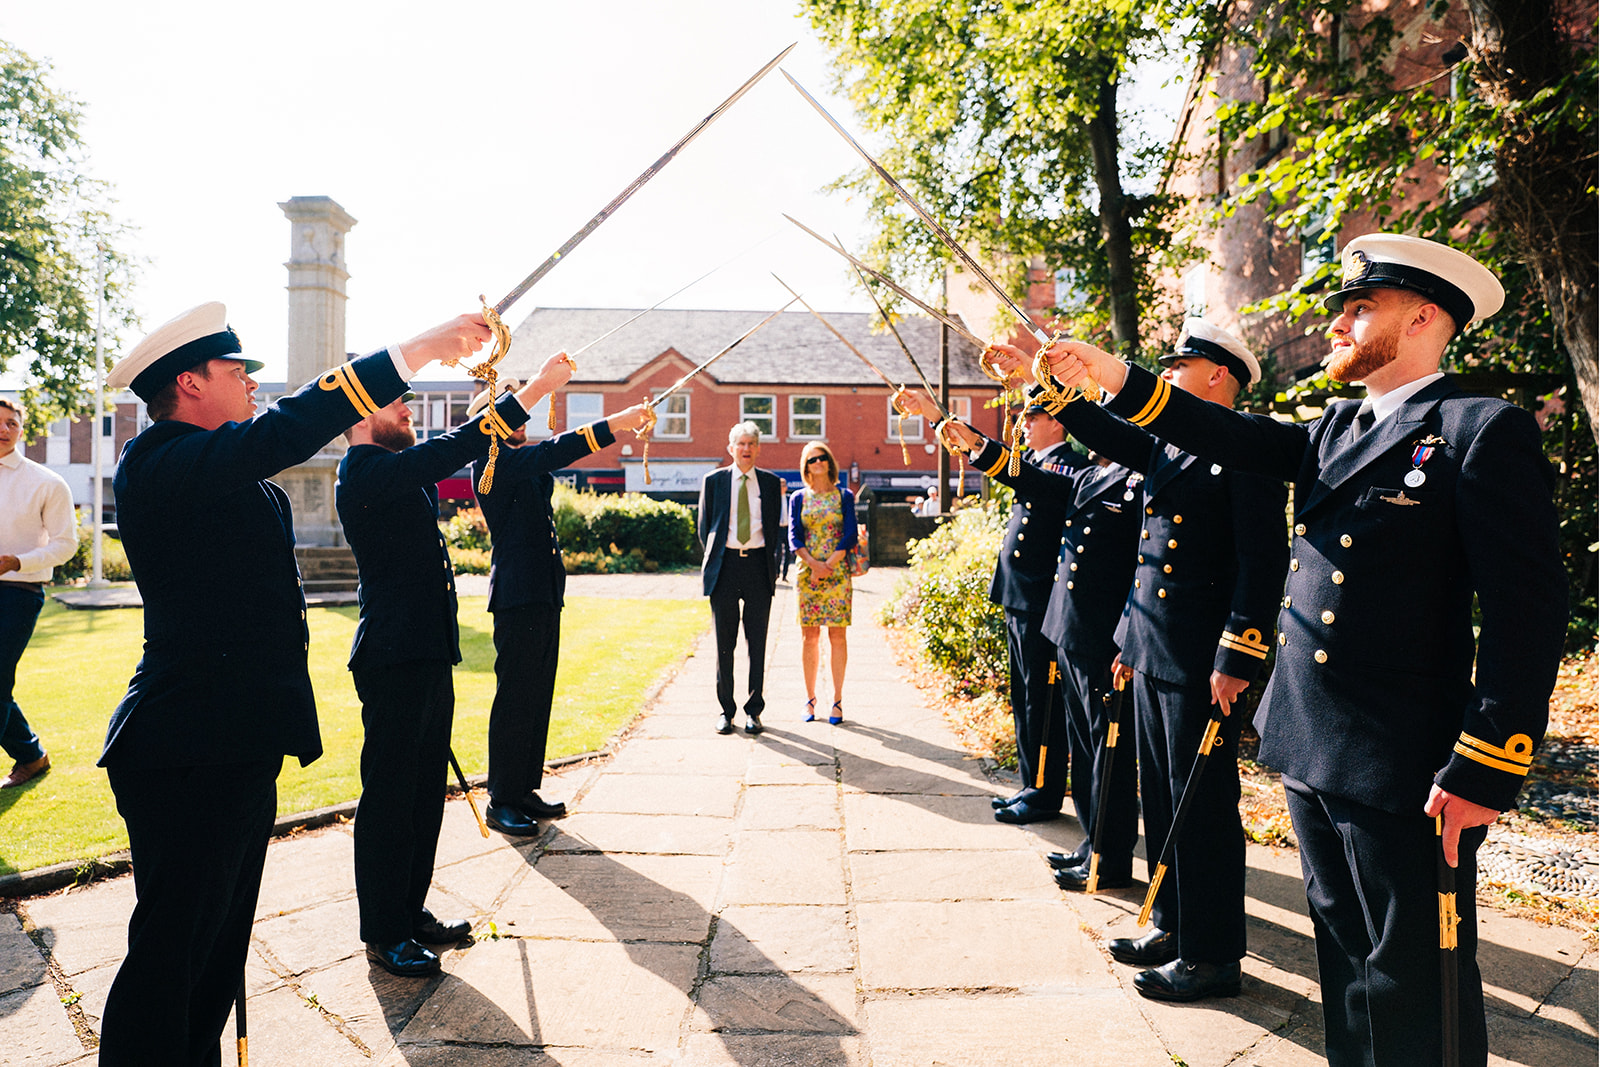 Derby DIY Farm Wedding Photography - the naval officers practice the sword salute
